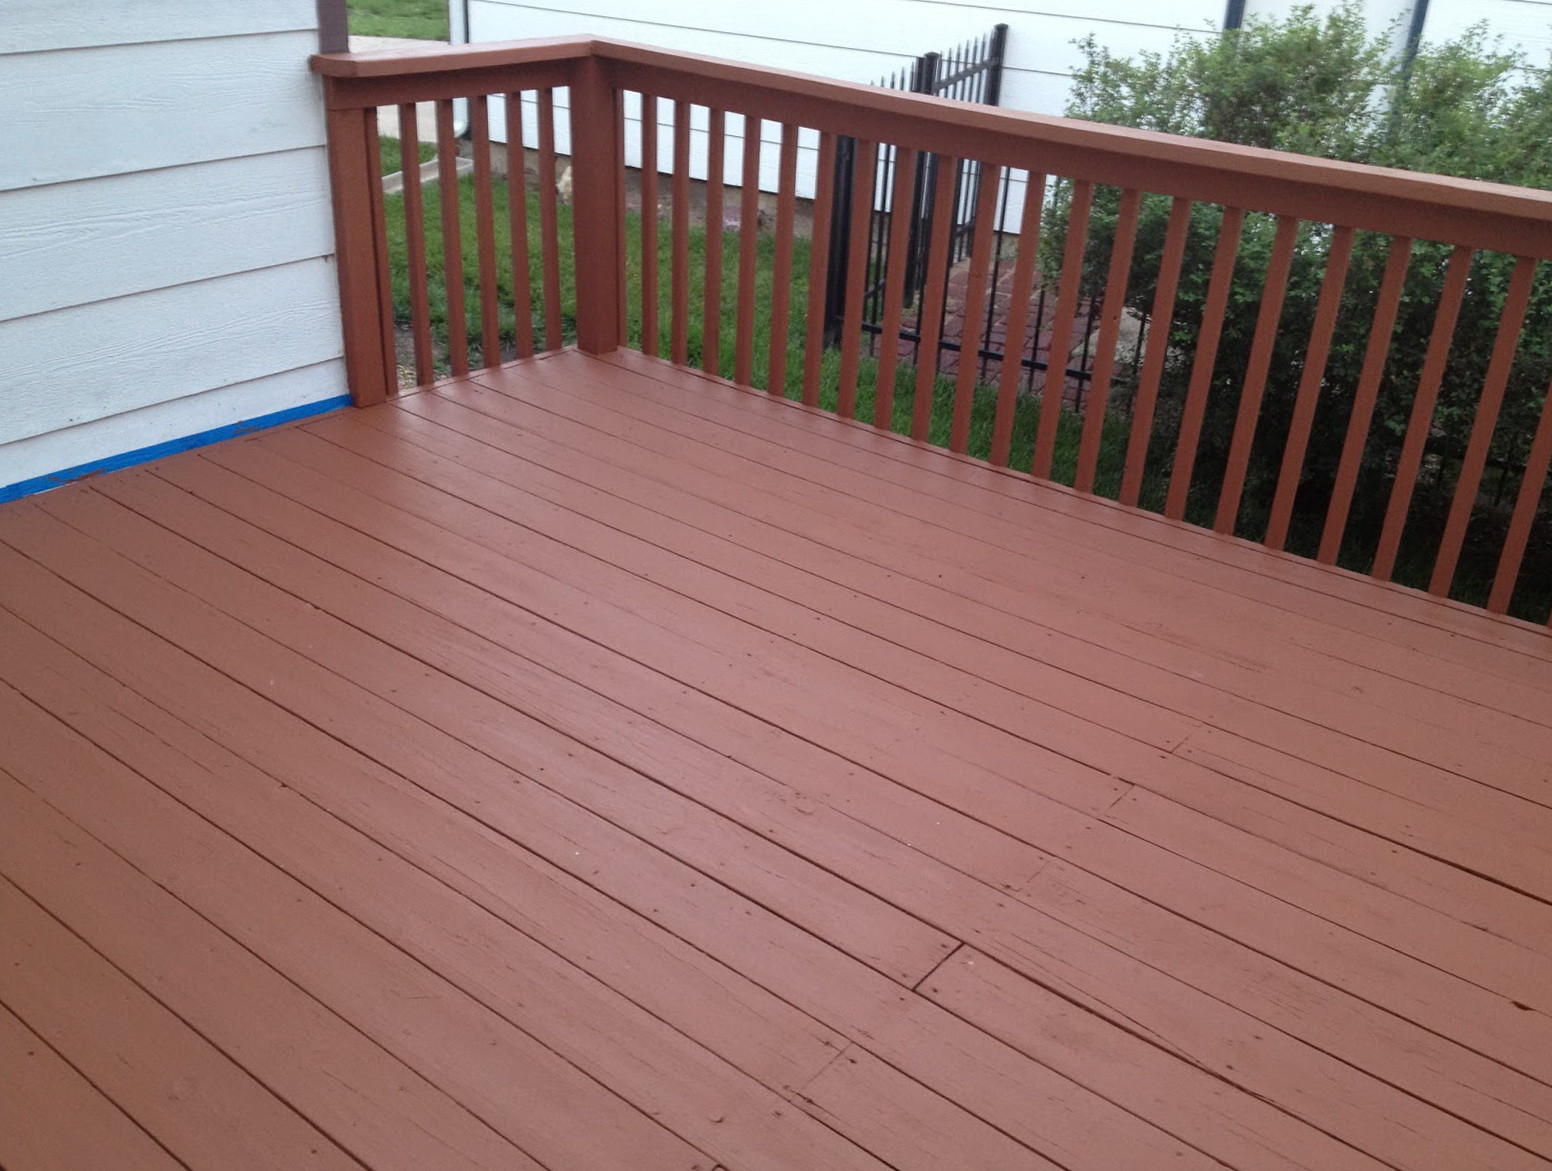 Deck Over Paint Home Depot
 Deck Stain Colors Home Depot